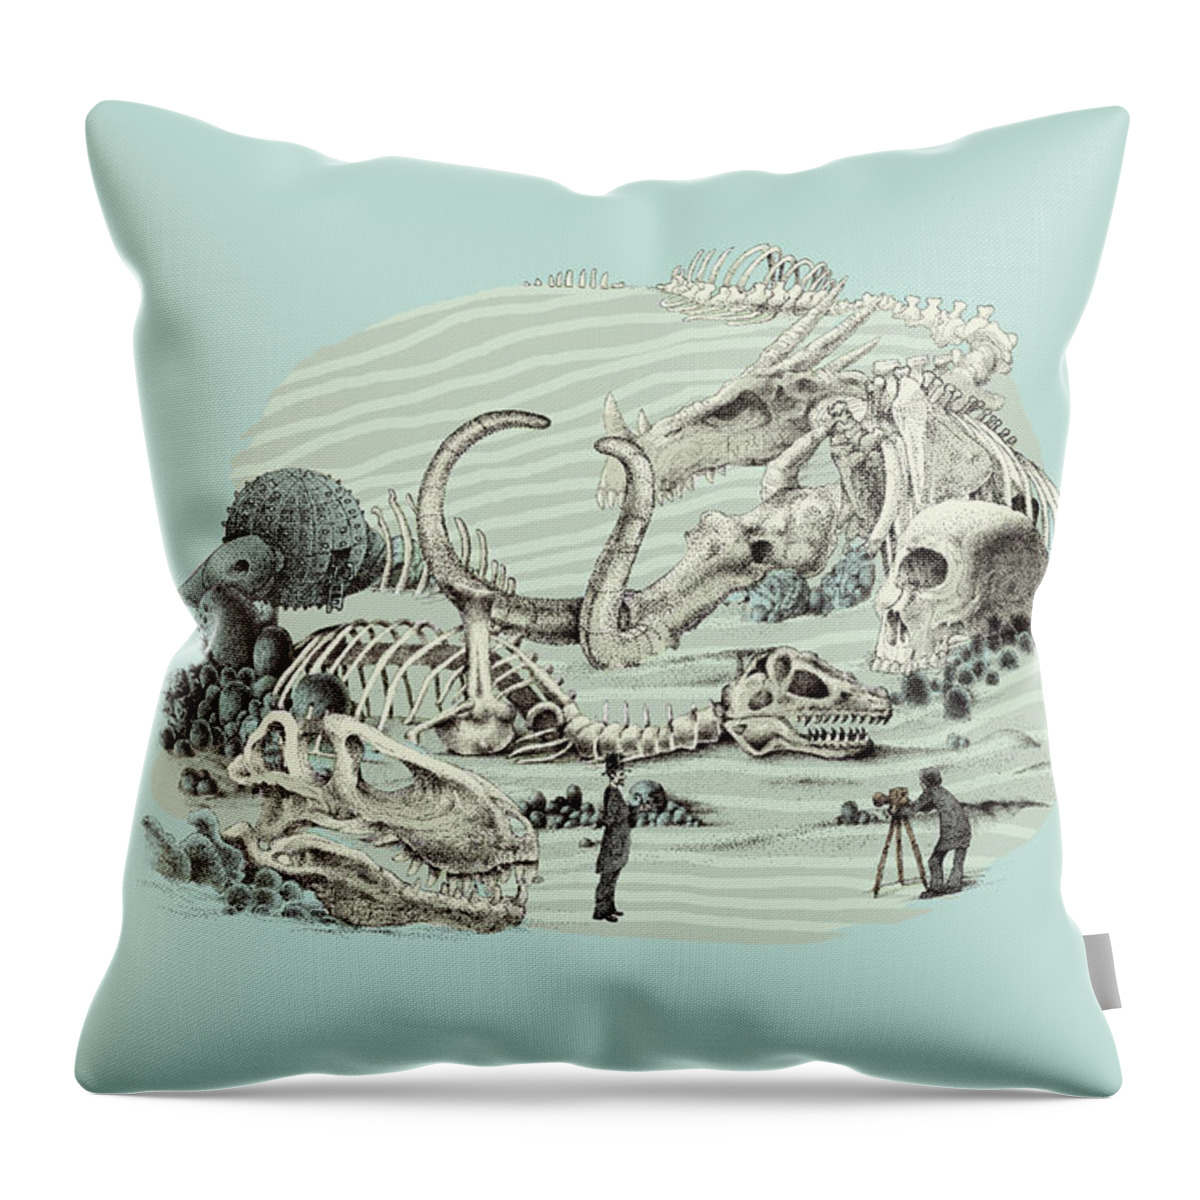 Vintage Throw Pillow featuring the drawing The Lost Beach by Eric Fan